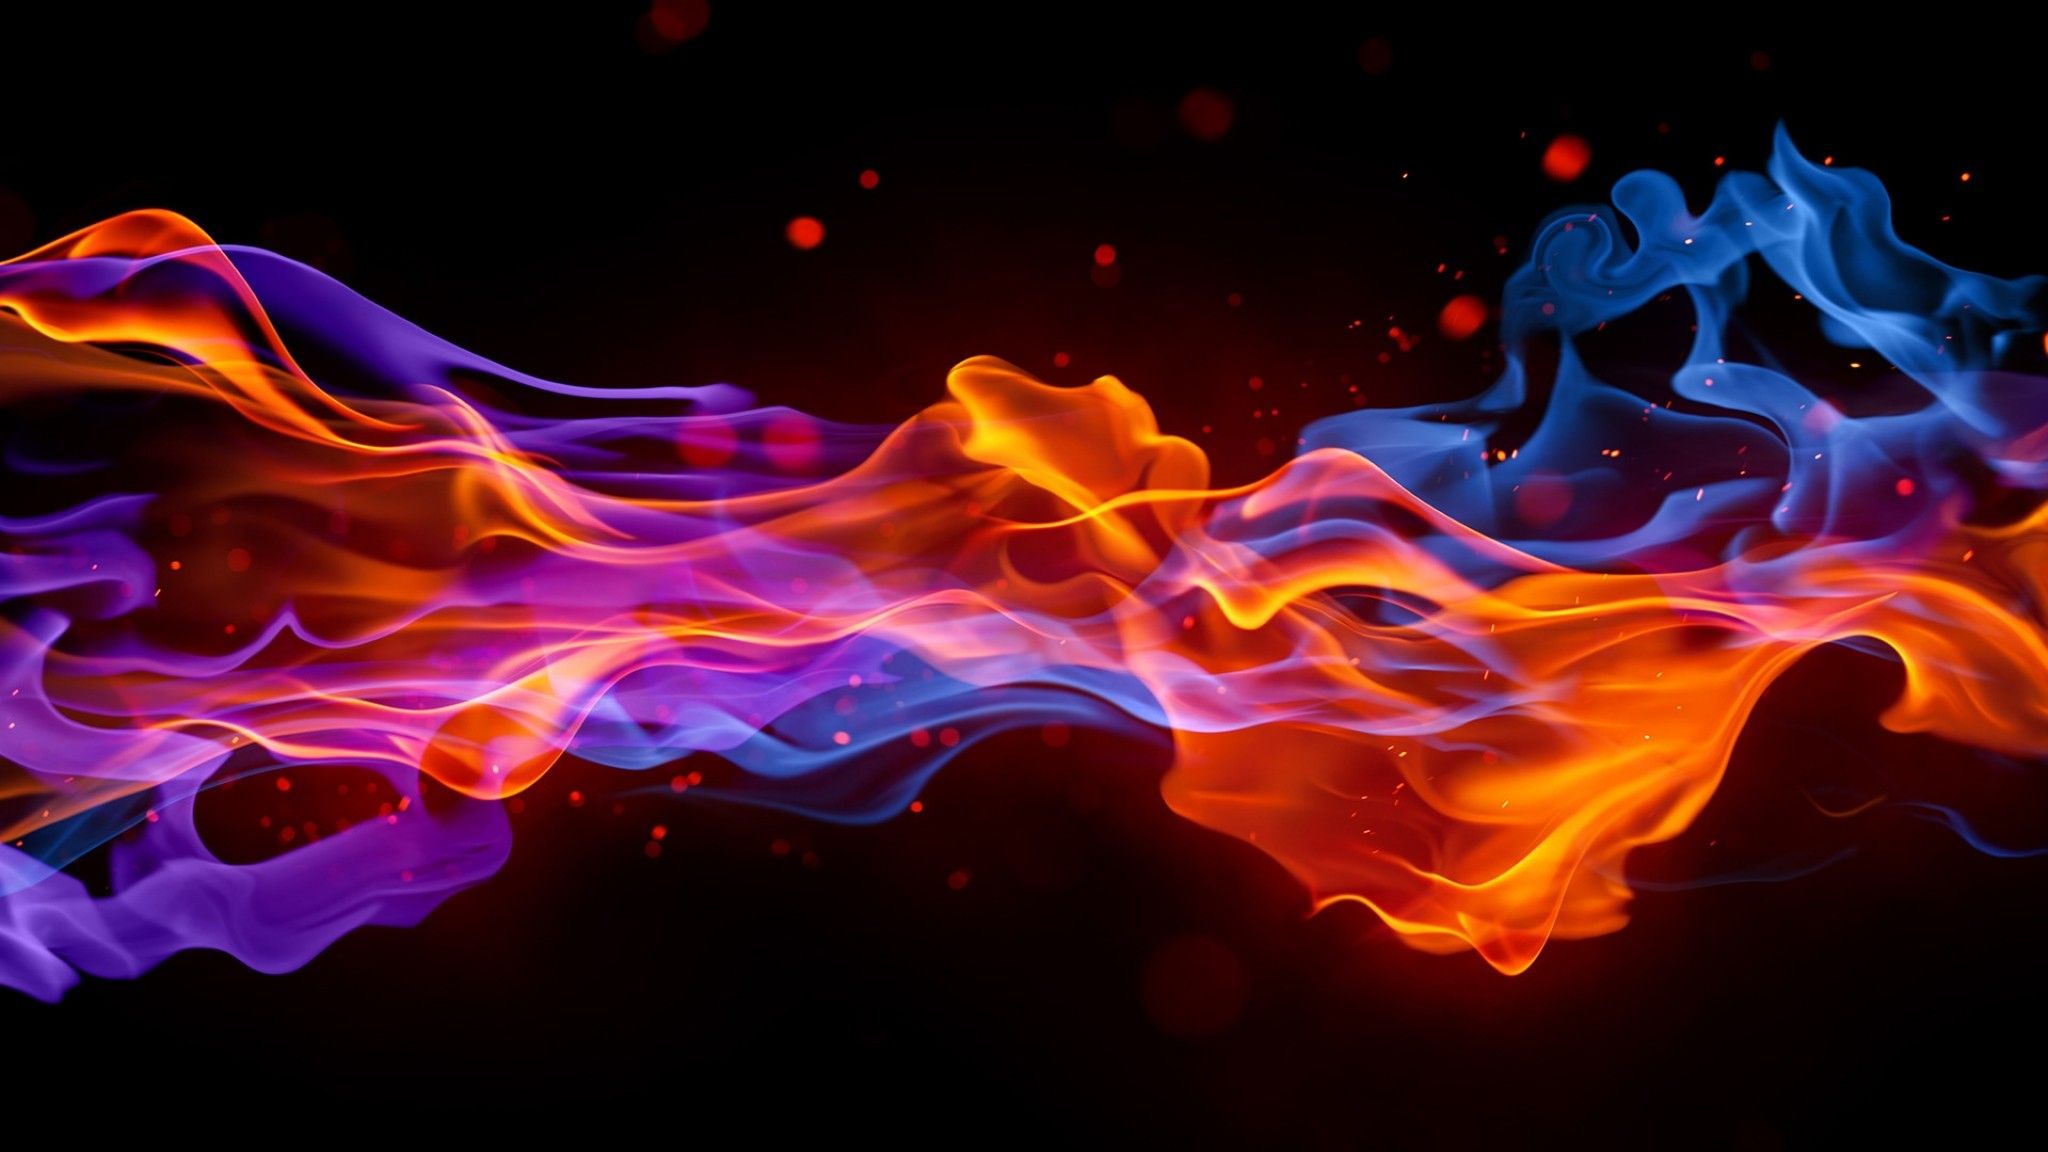 A firey wallpaper with a colorful twist. - Flames, fire